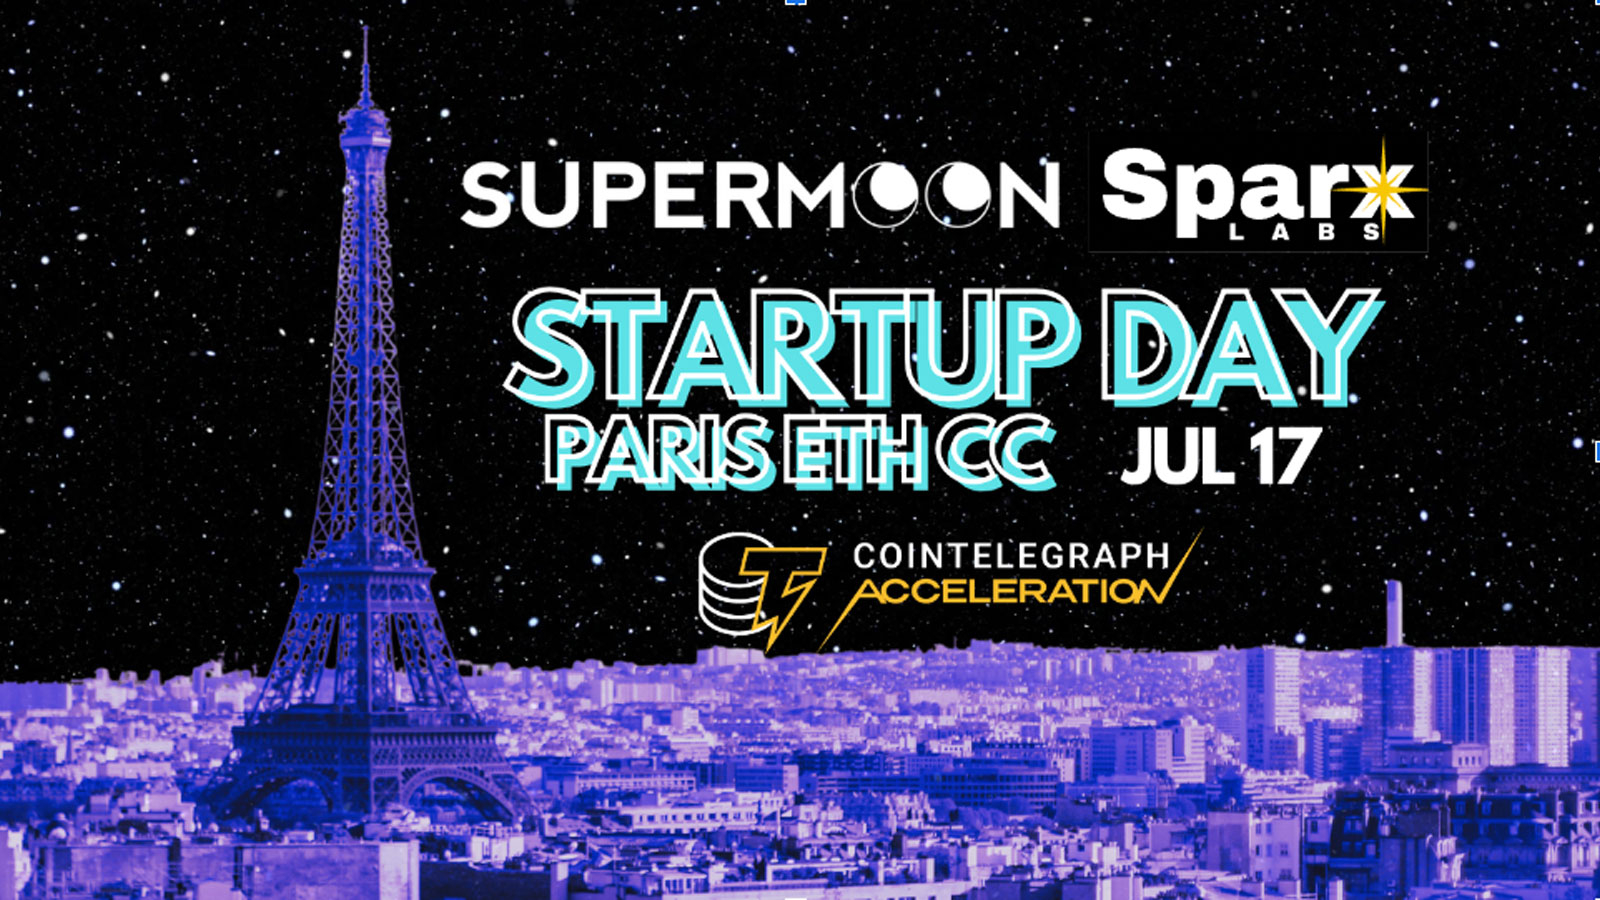 Supermoon and Sparx to Gather Top-Tier Startups and Investors at Startup Day Paris EthCC